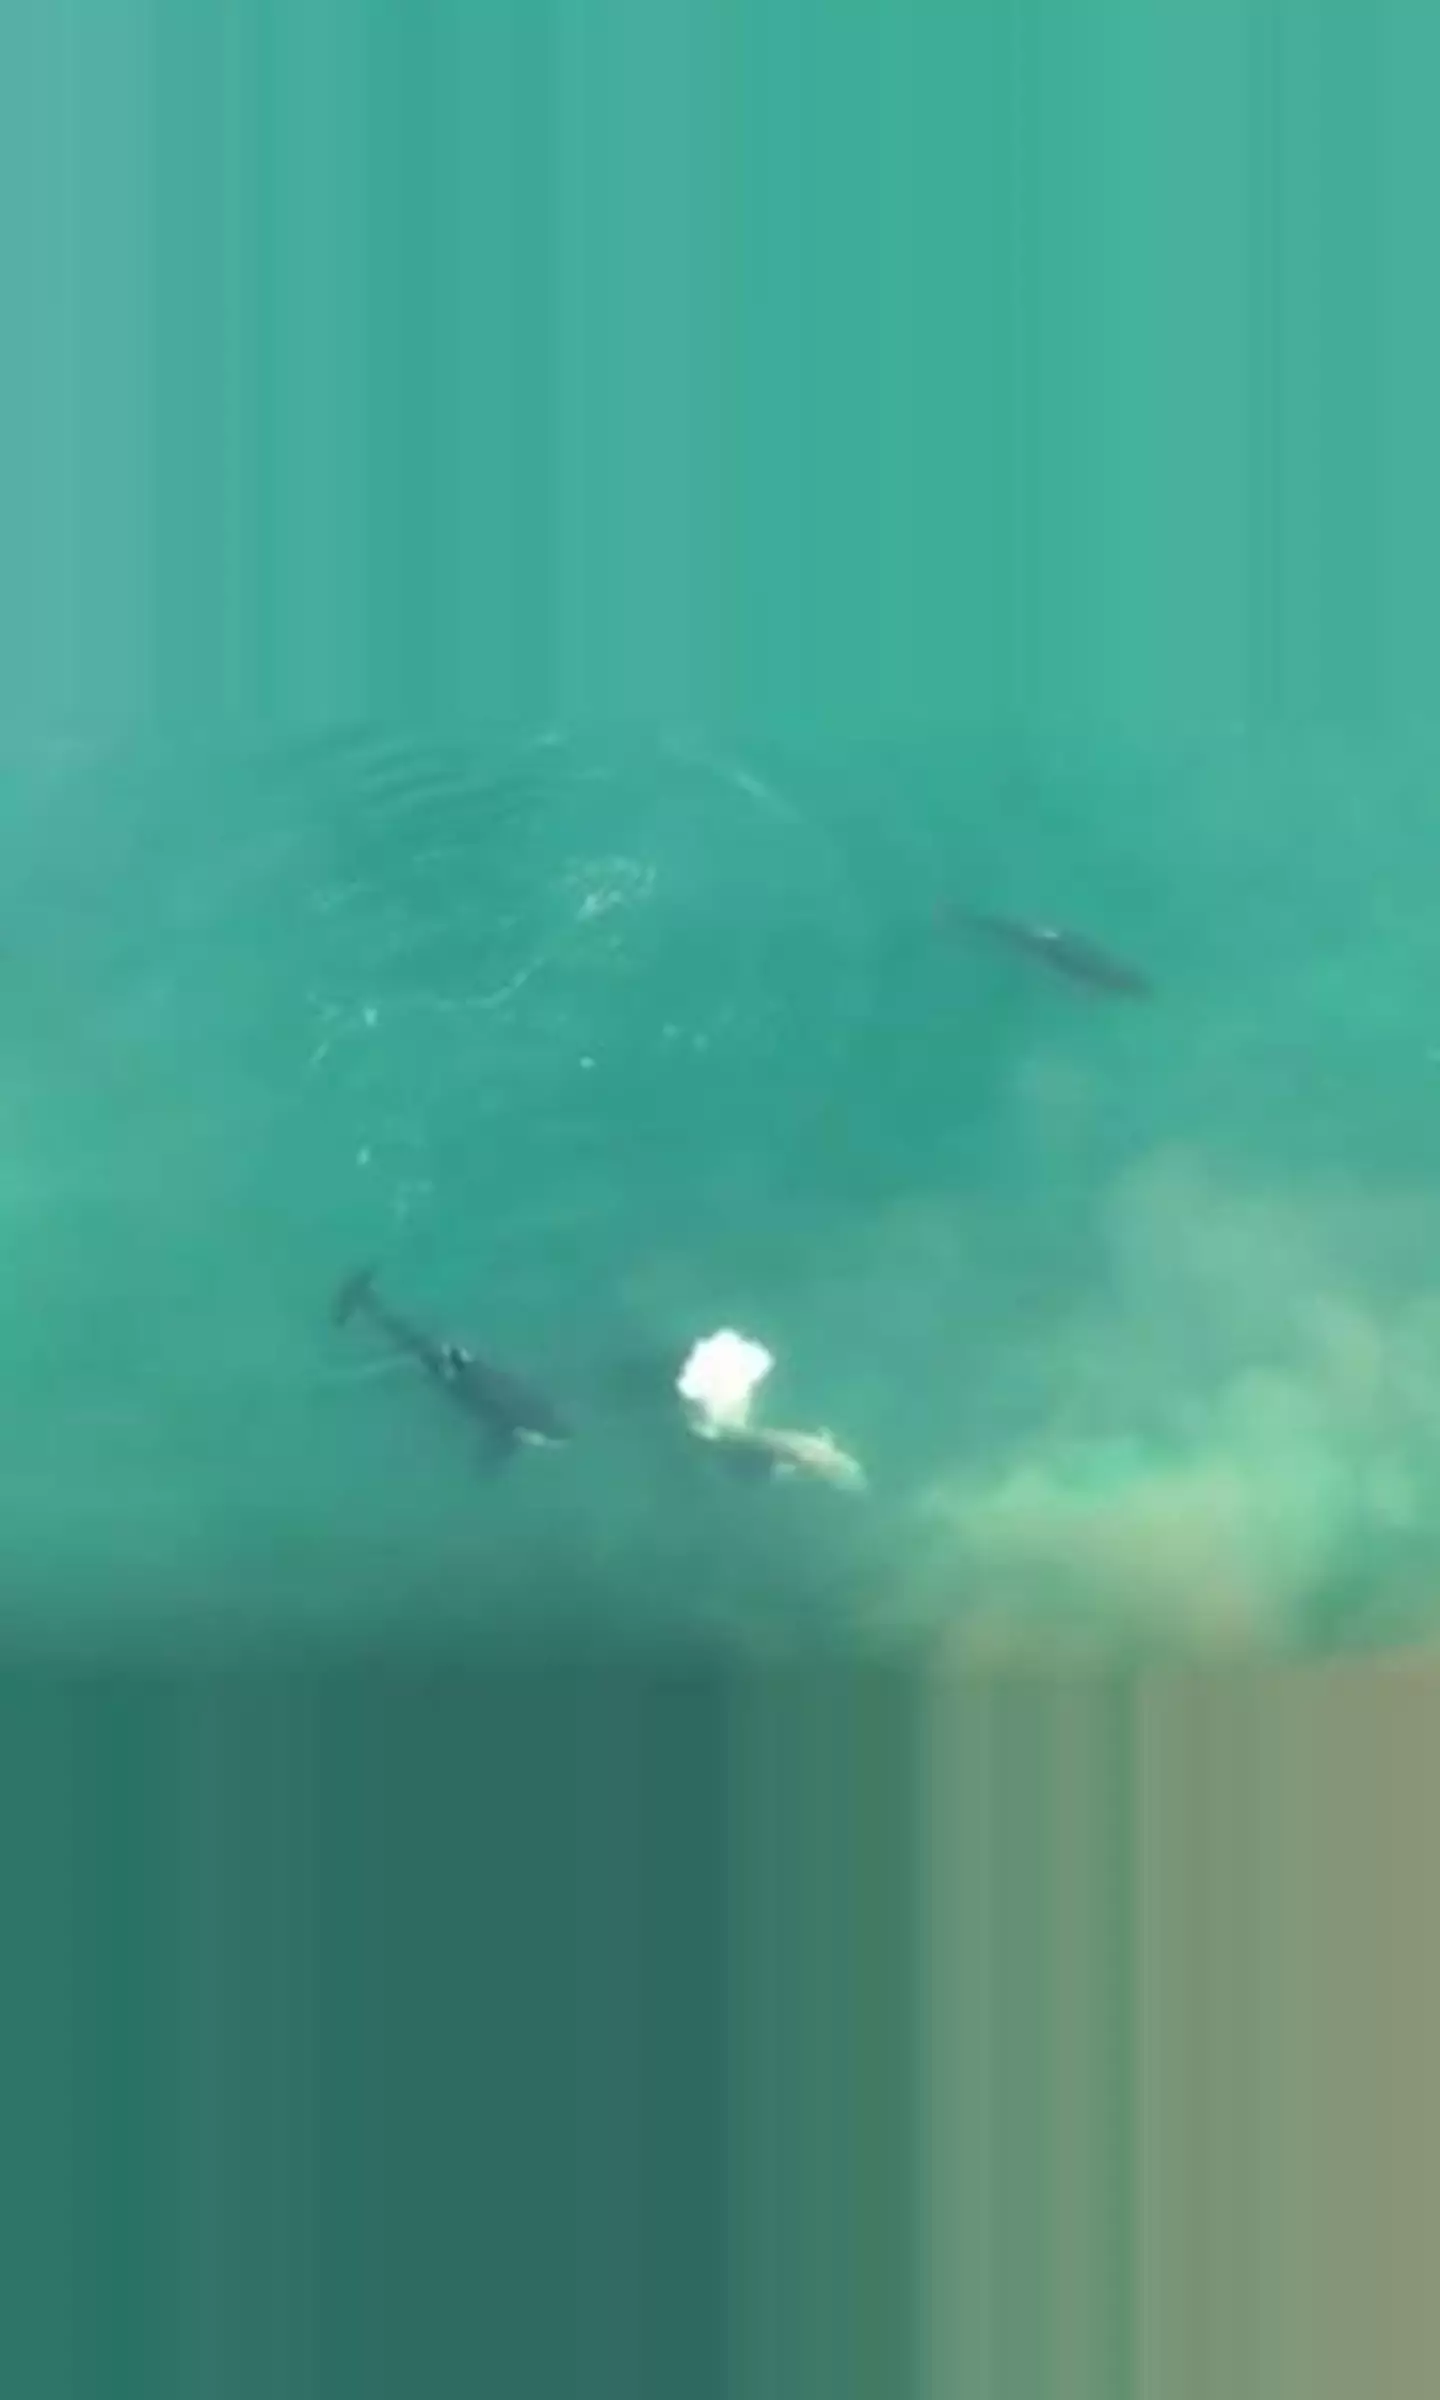 The shark is circled by three killer whales.